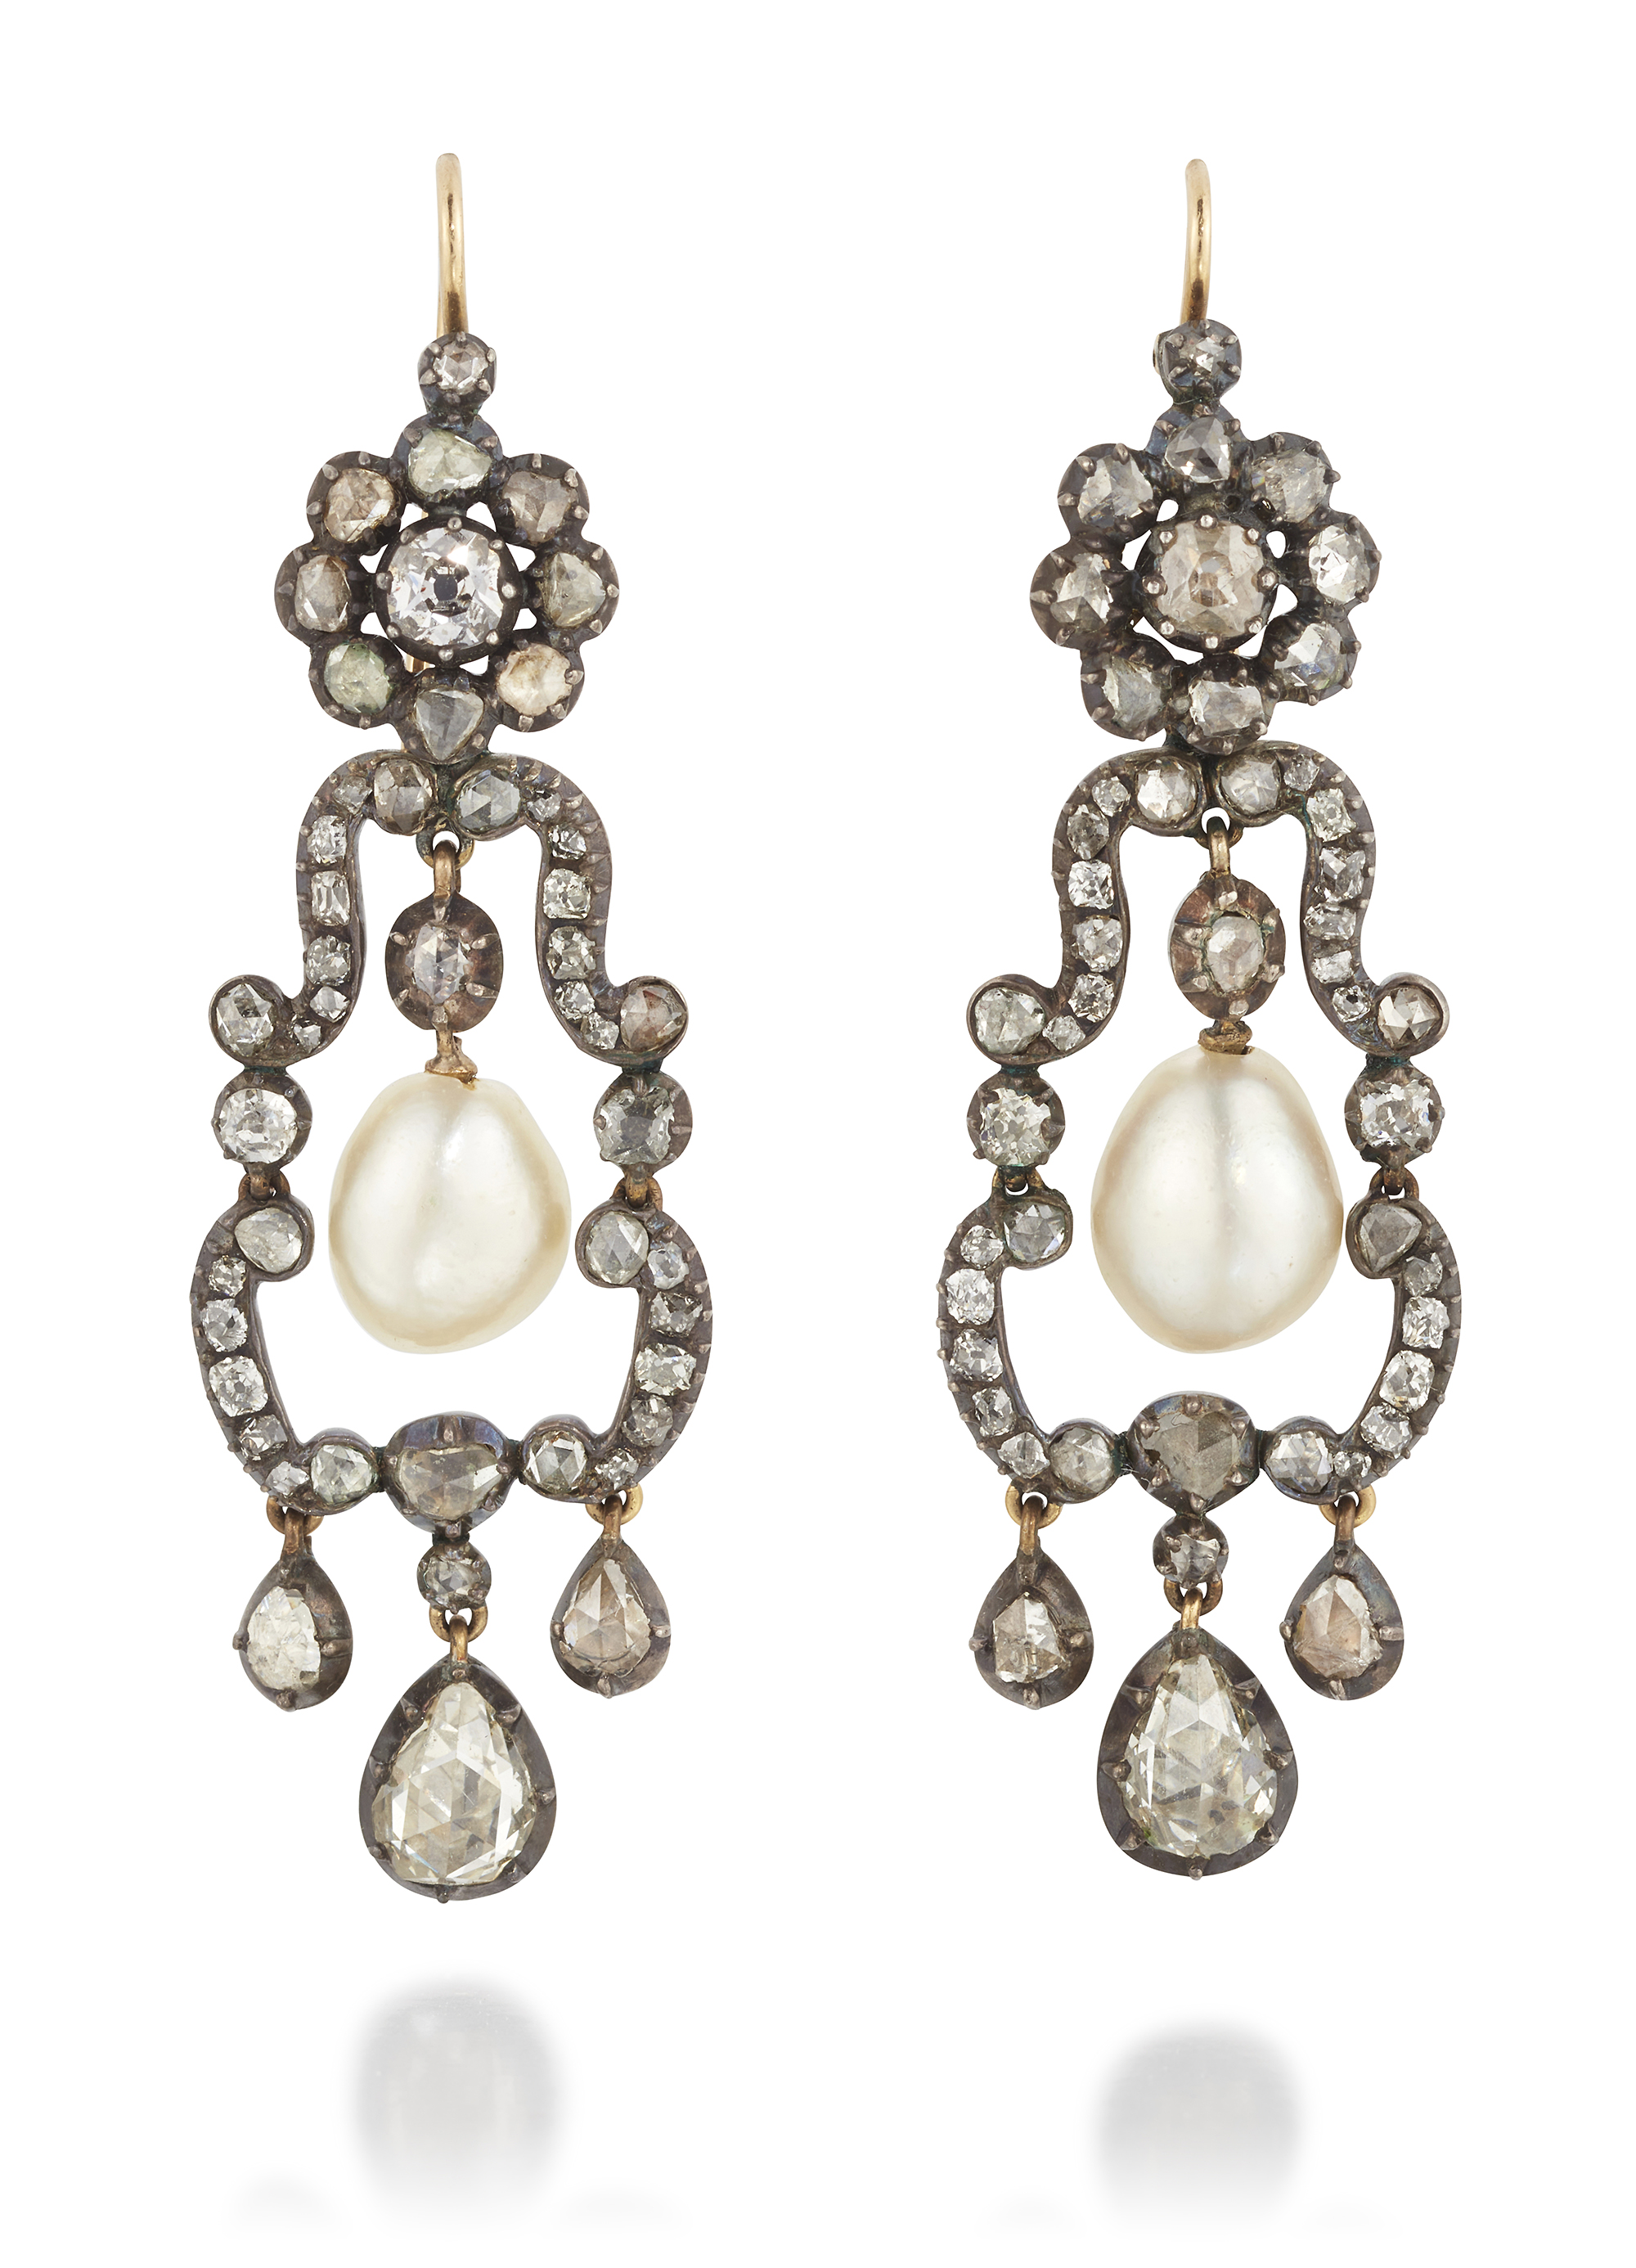 A pair of early 19th century diamond and pearl earrings, an articulated rose-cut and mine-cut dia...